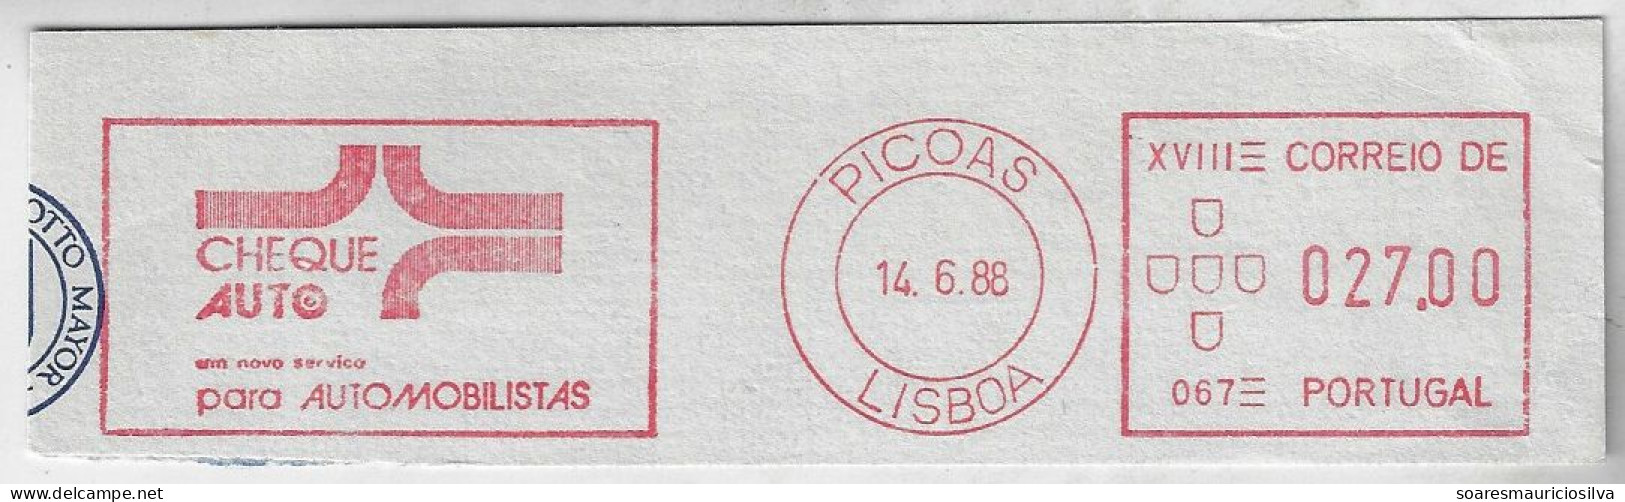 Portugal 1988 Cover Fragment Meter Stamp Hasler Mailmaster Slogan Check Auto A New Service For Motorists Lisbon Picoa - Cartas & Documentos